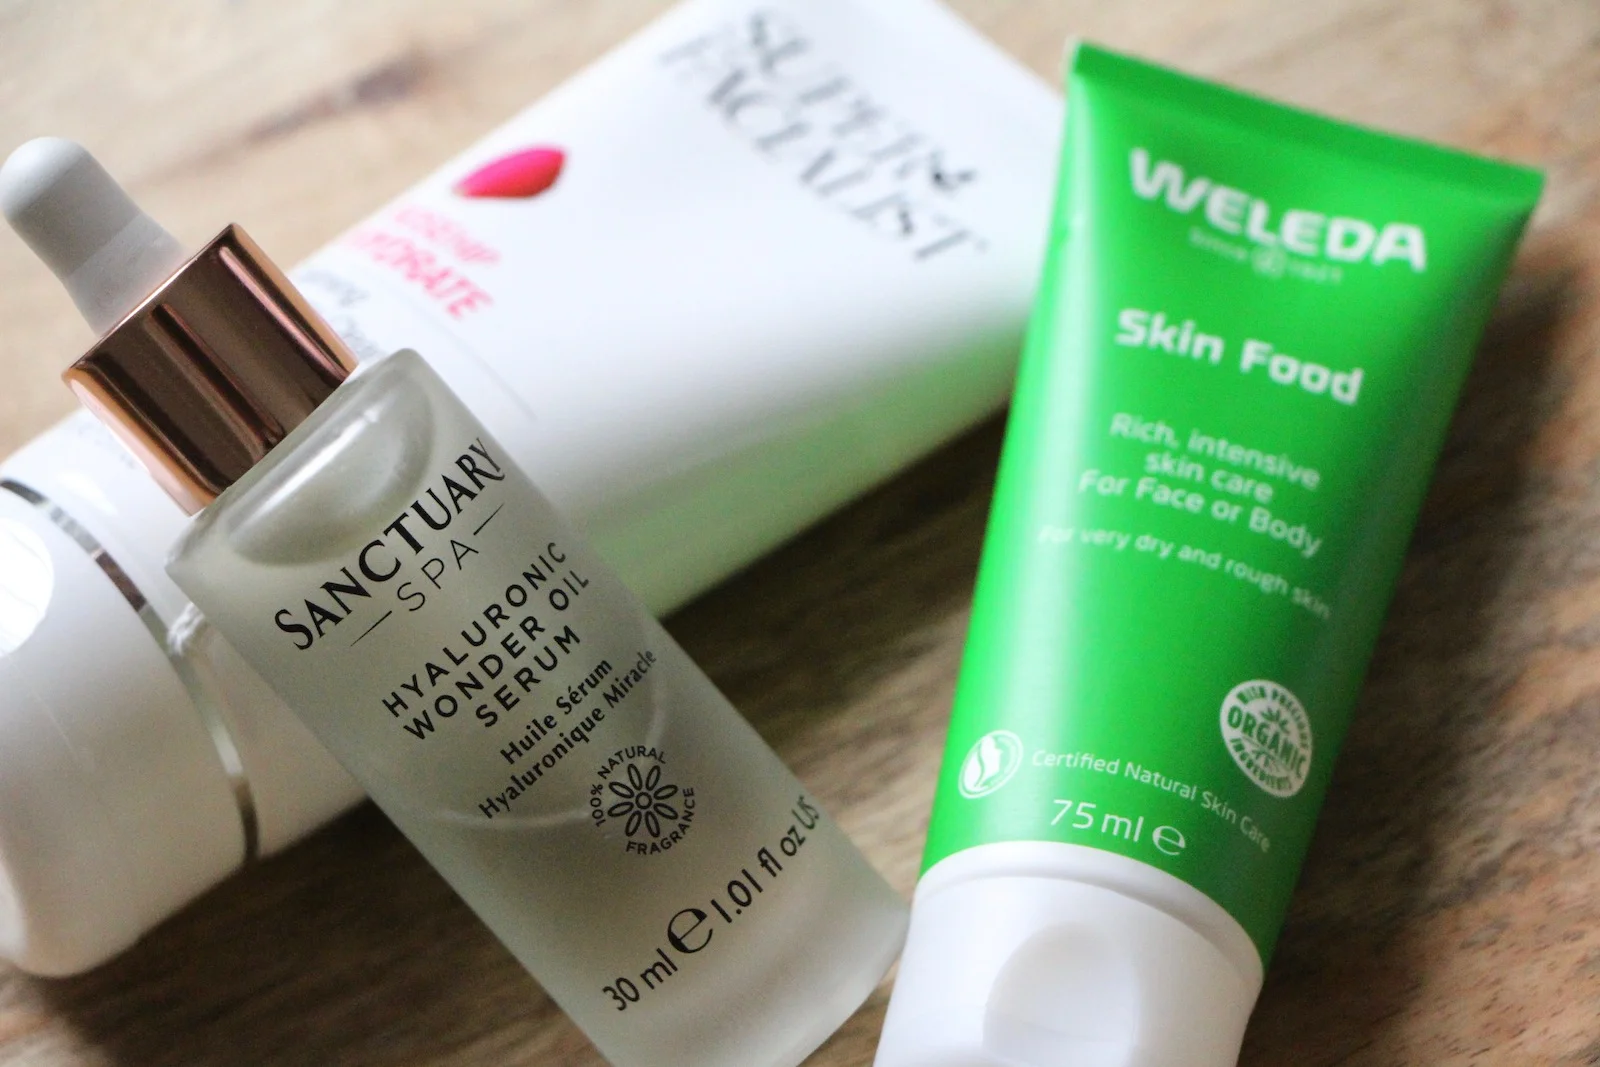 Sainsbury’s New Beauty Aisles: My Favourite Products | AD